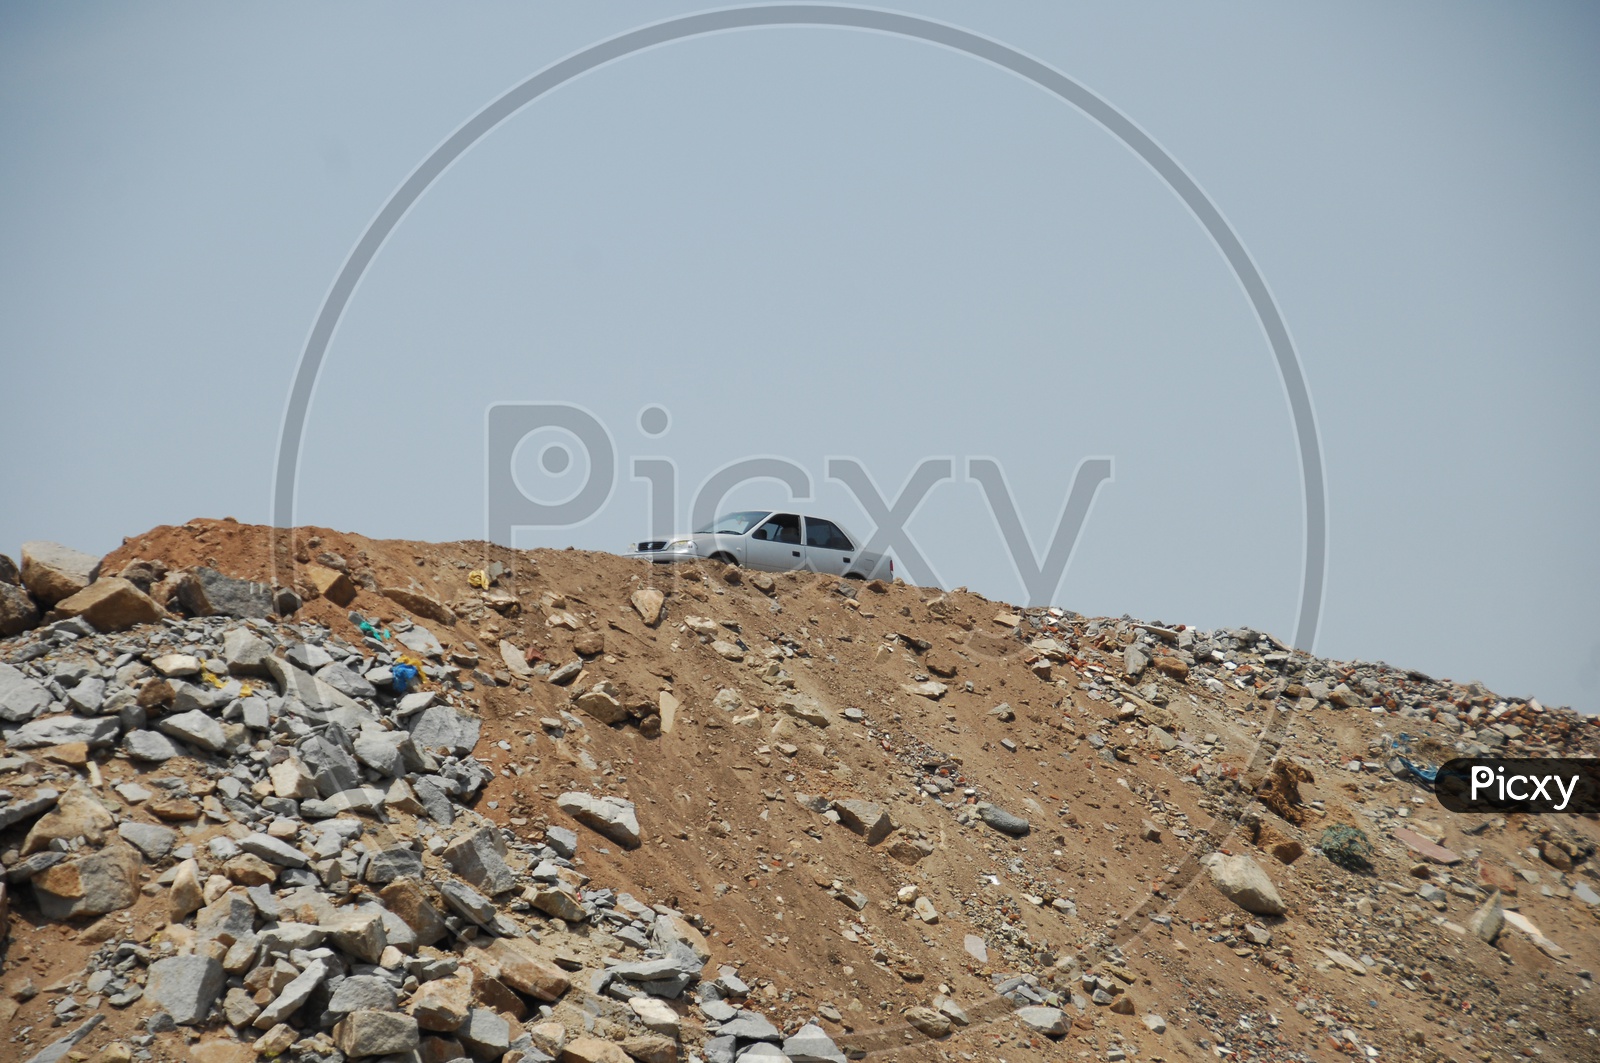 A stationary car on the top of a cliff